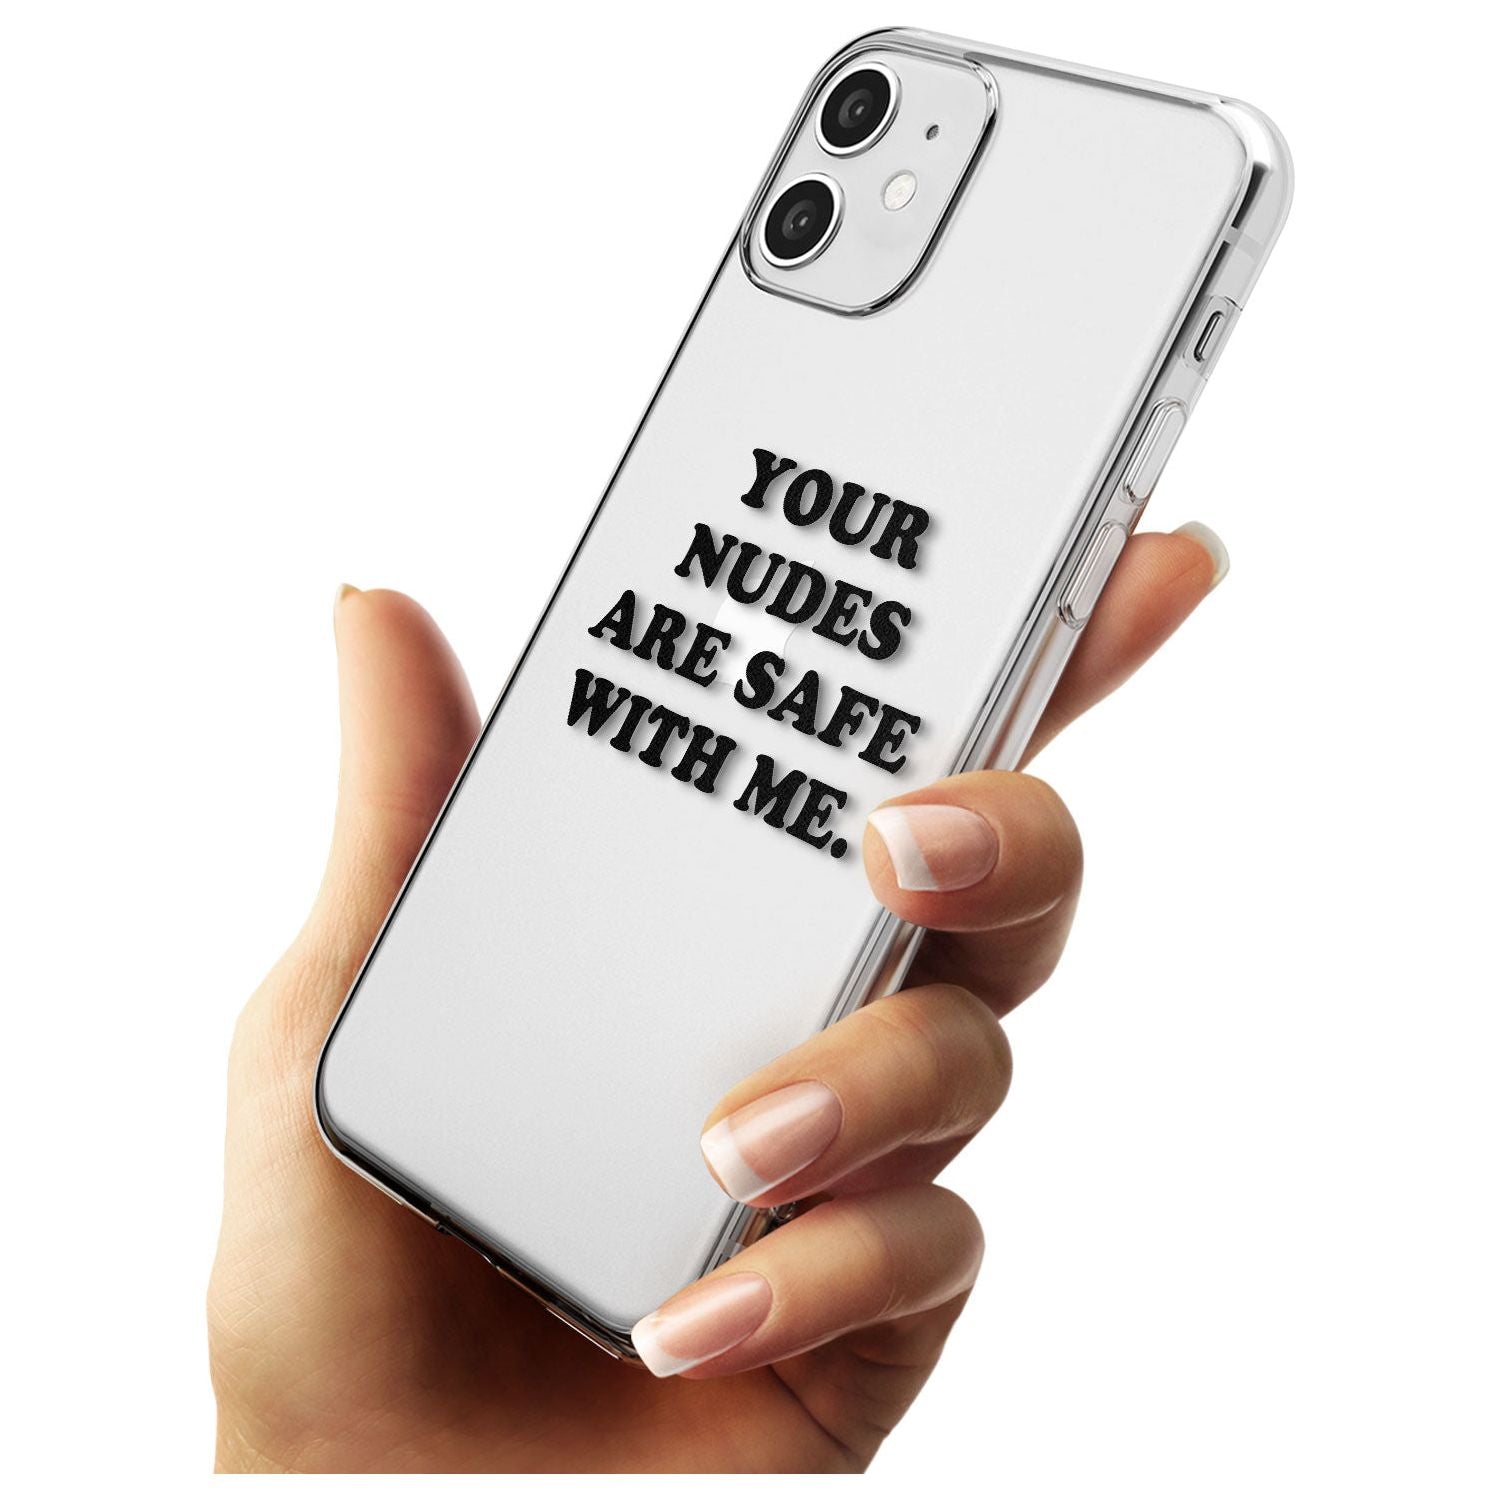 Your nudes are safe with me... BLACK Slim TPU Phone Case for iPhone 11